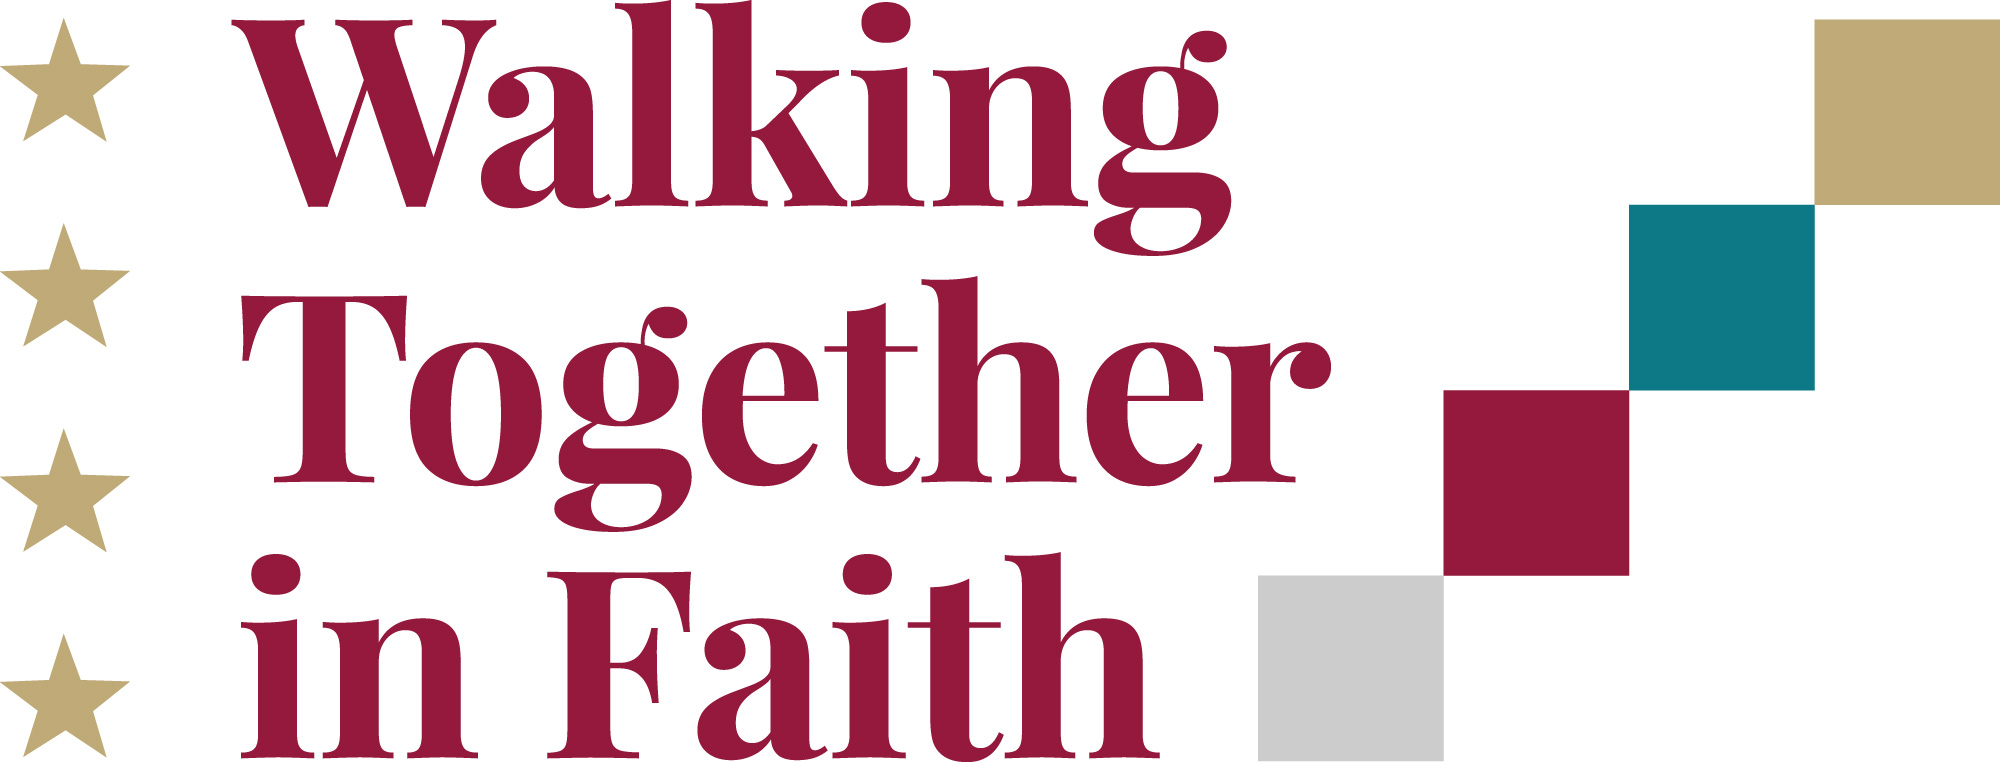 Walking together in faith logo.